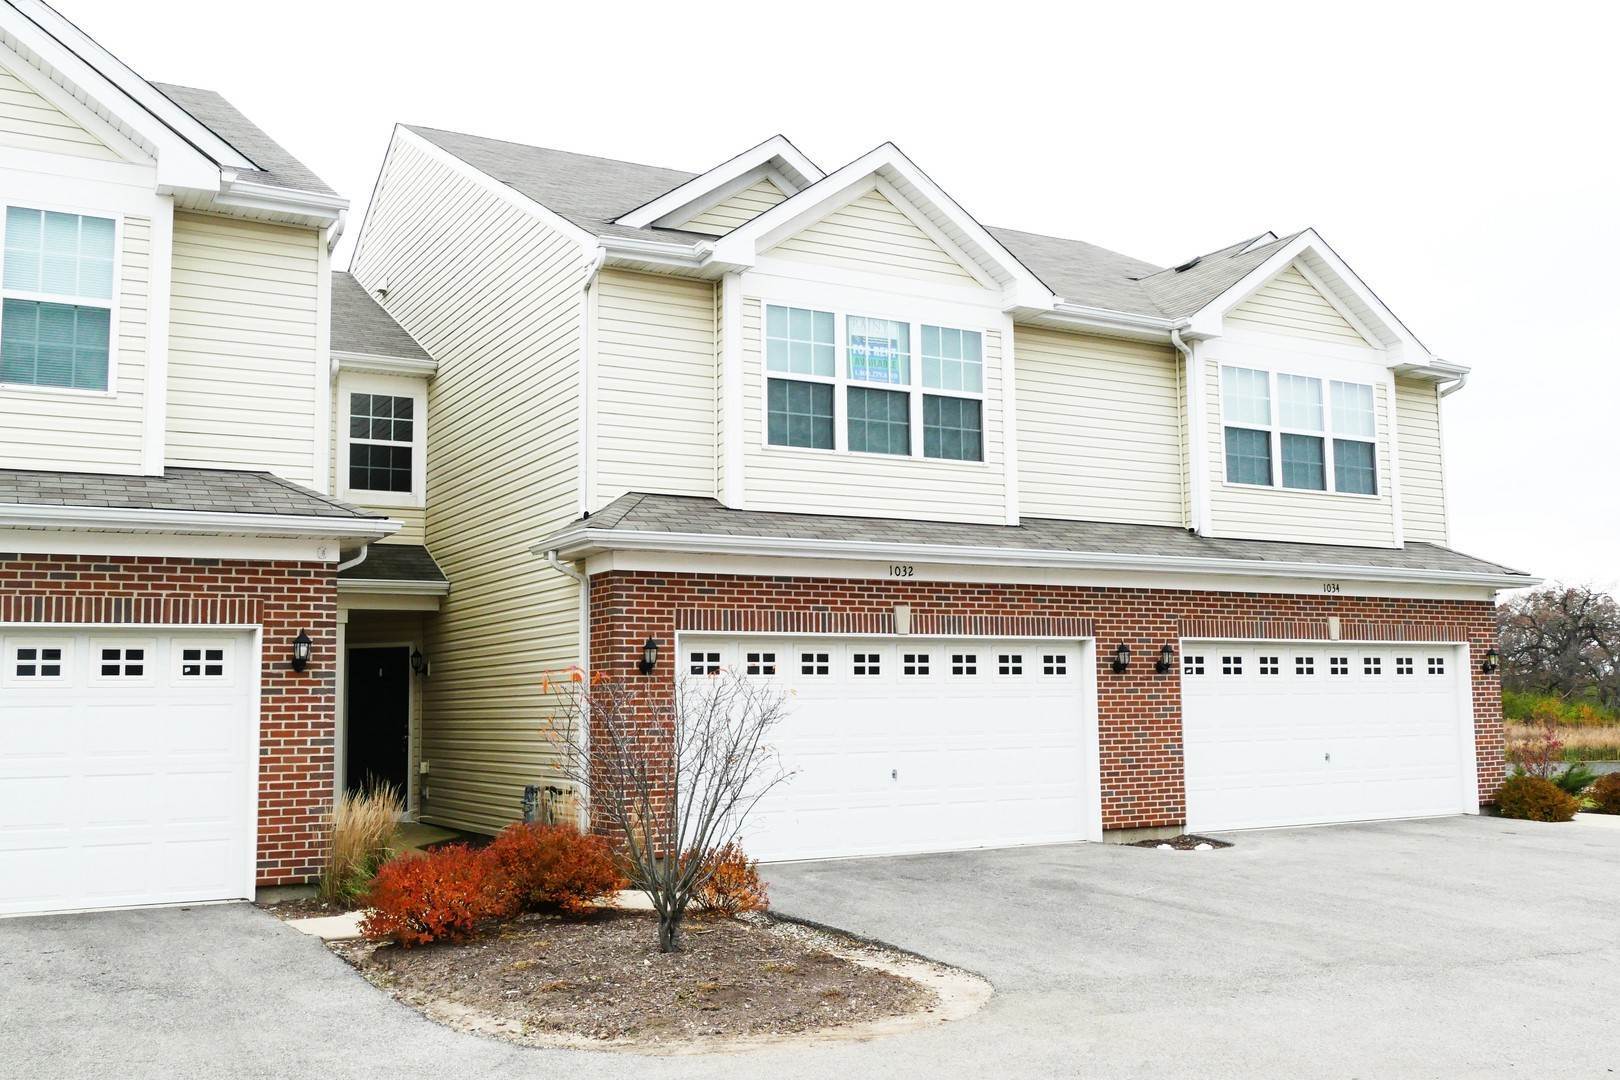 Townhouse at Hampshire, IL 60140